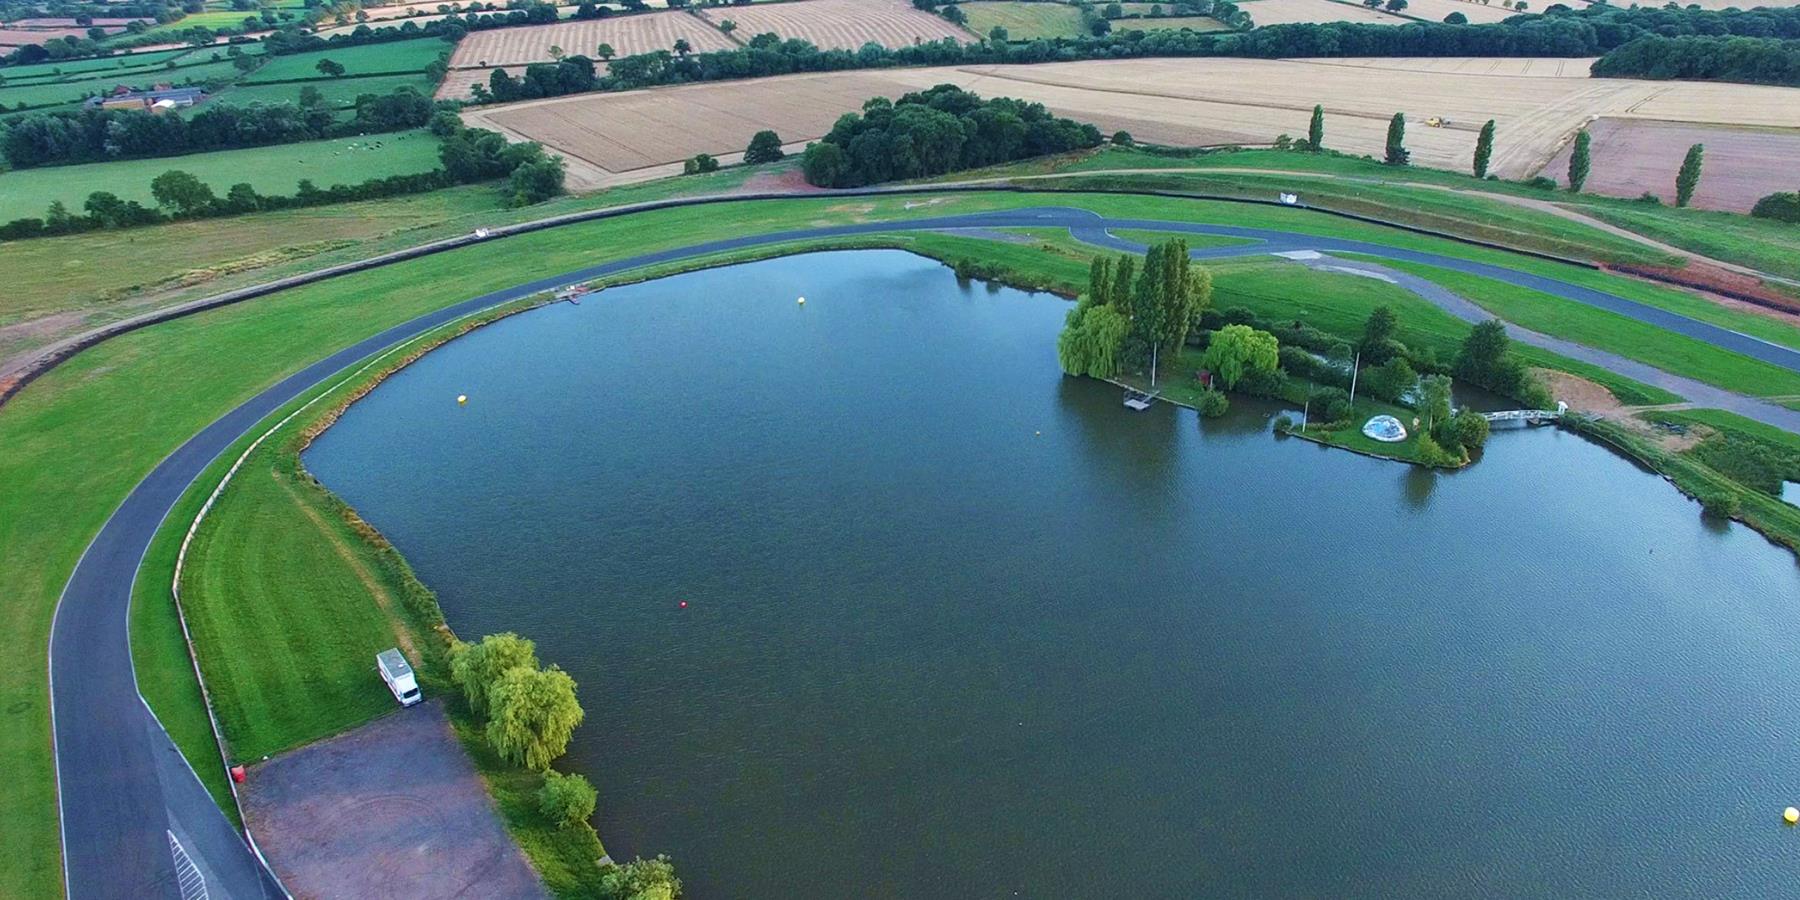 Racing track around a lake in the countryside.